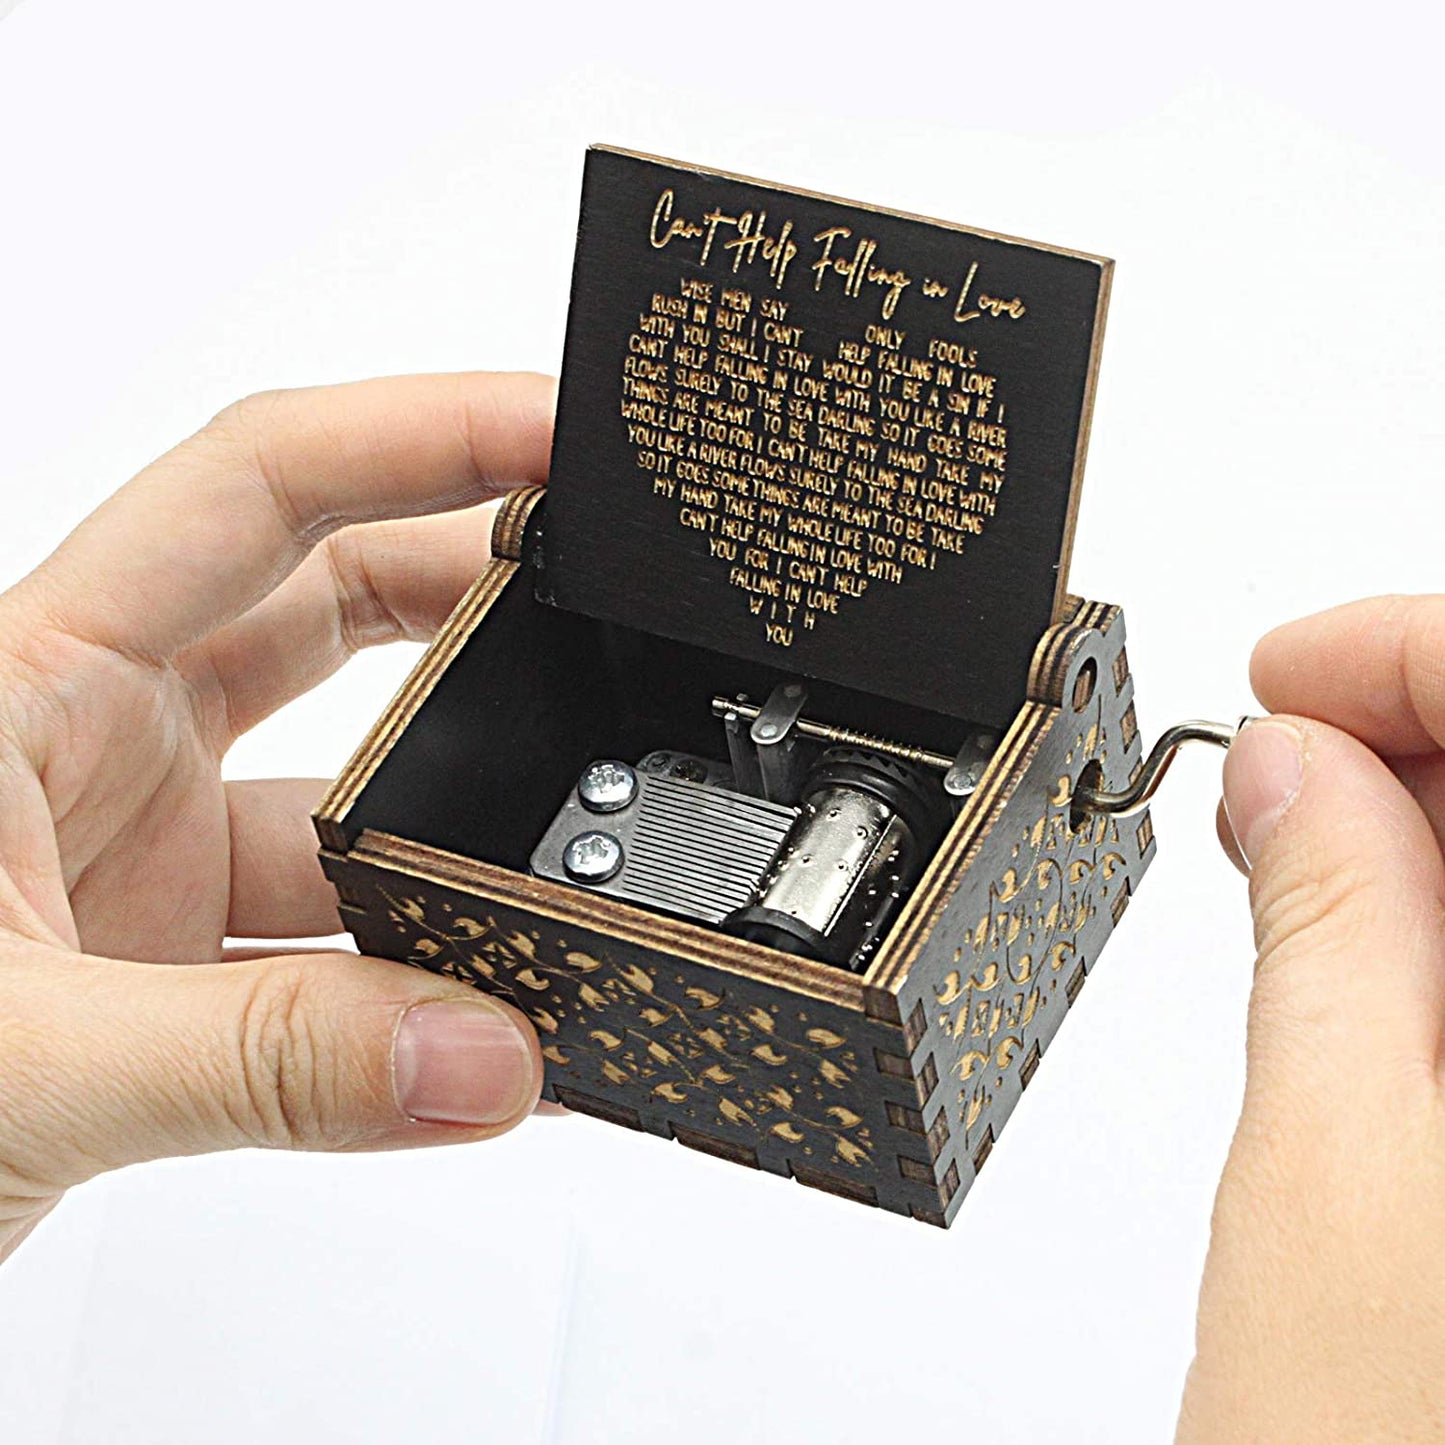 A pair of hands are holding a small wooden crank-style music box. The lyrics for the song, 'Can't Help Falling in Love' are engraved on the inside lid.